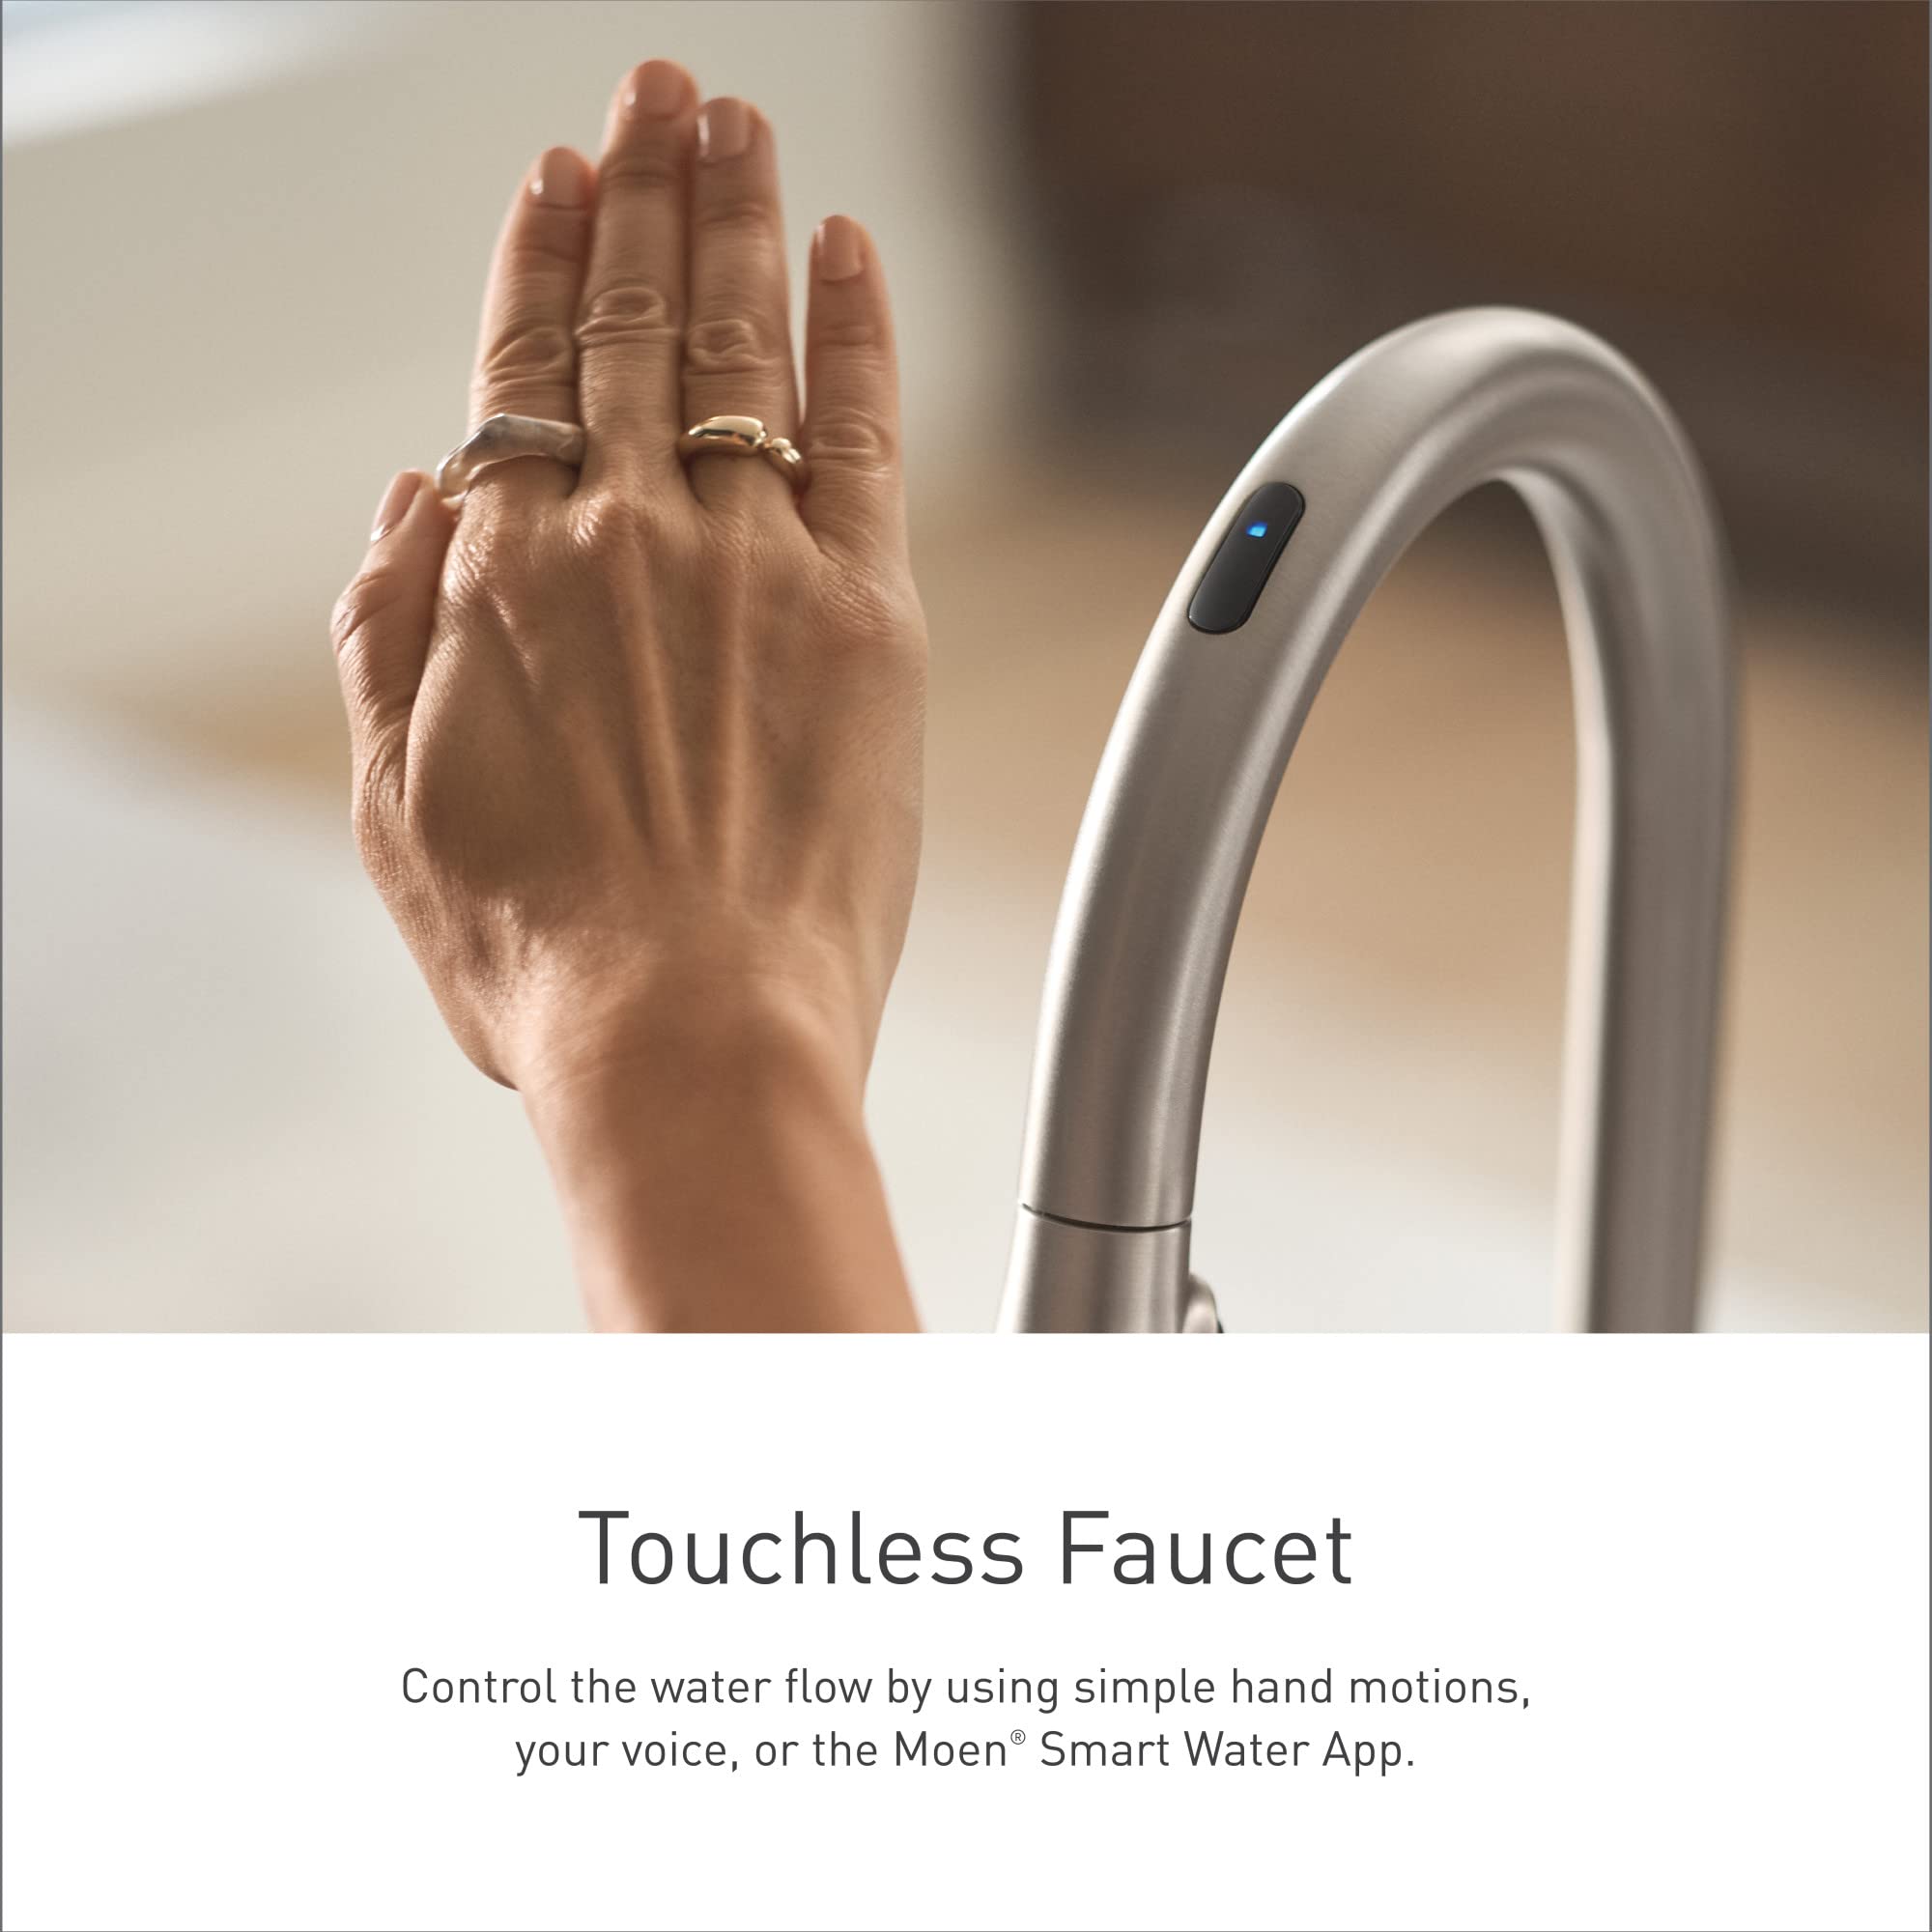 Moen 7864EVBG Sleek Smart Touchless Pull Down Sprayer Kitchen Faucet with Voice Control and Power Boost, Brushed Gold